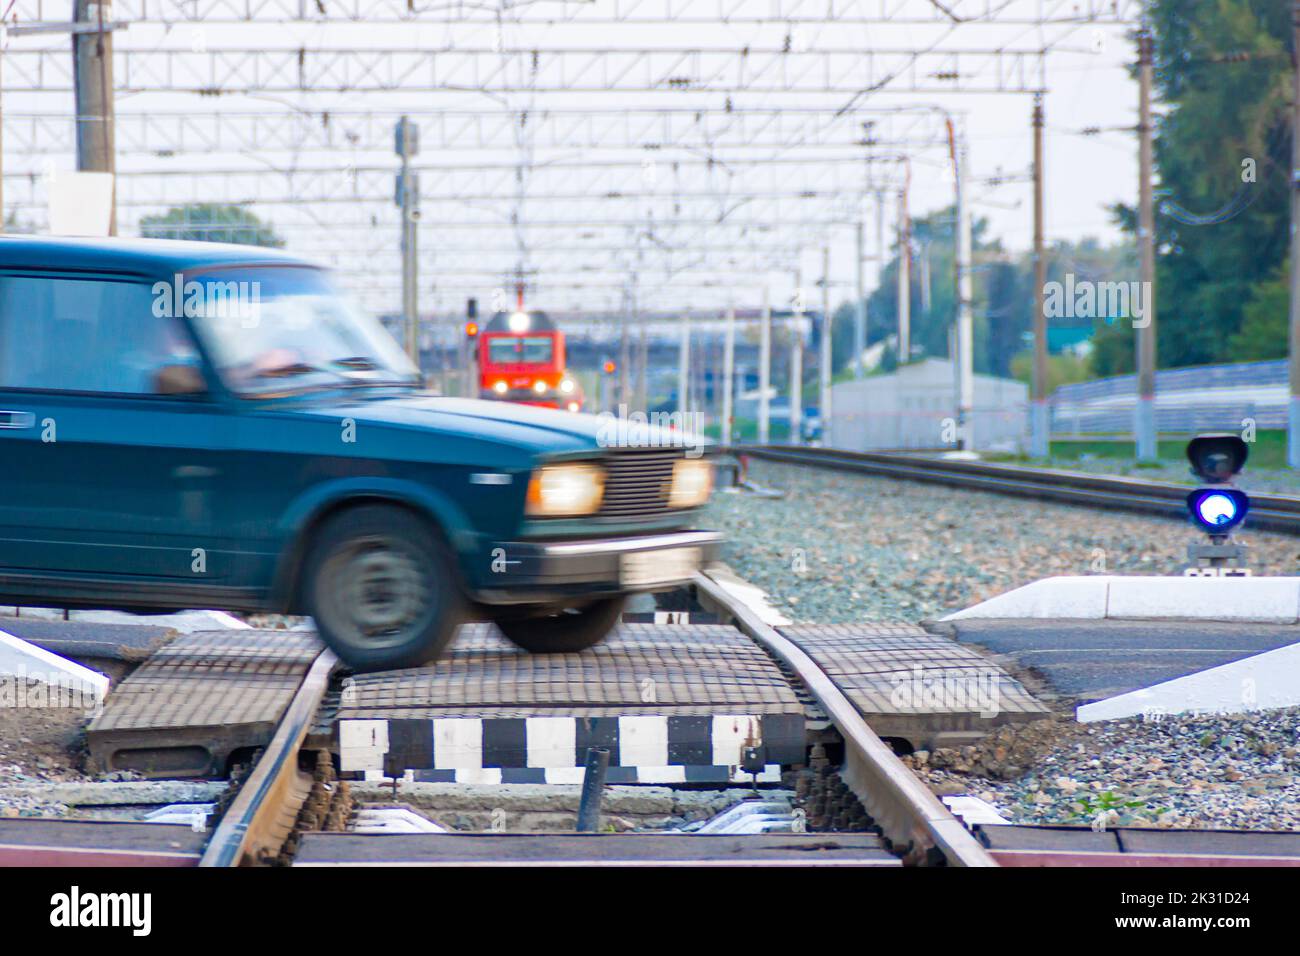 railway crossing through which an old passenger car passes while crossing the railway tracks in front of an approaching train, selective focus Stock Photo